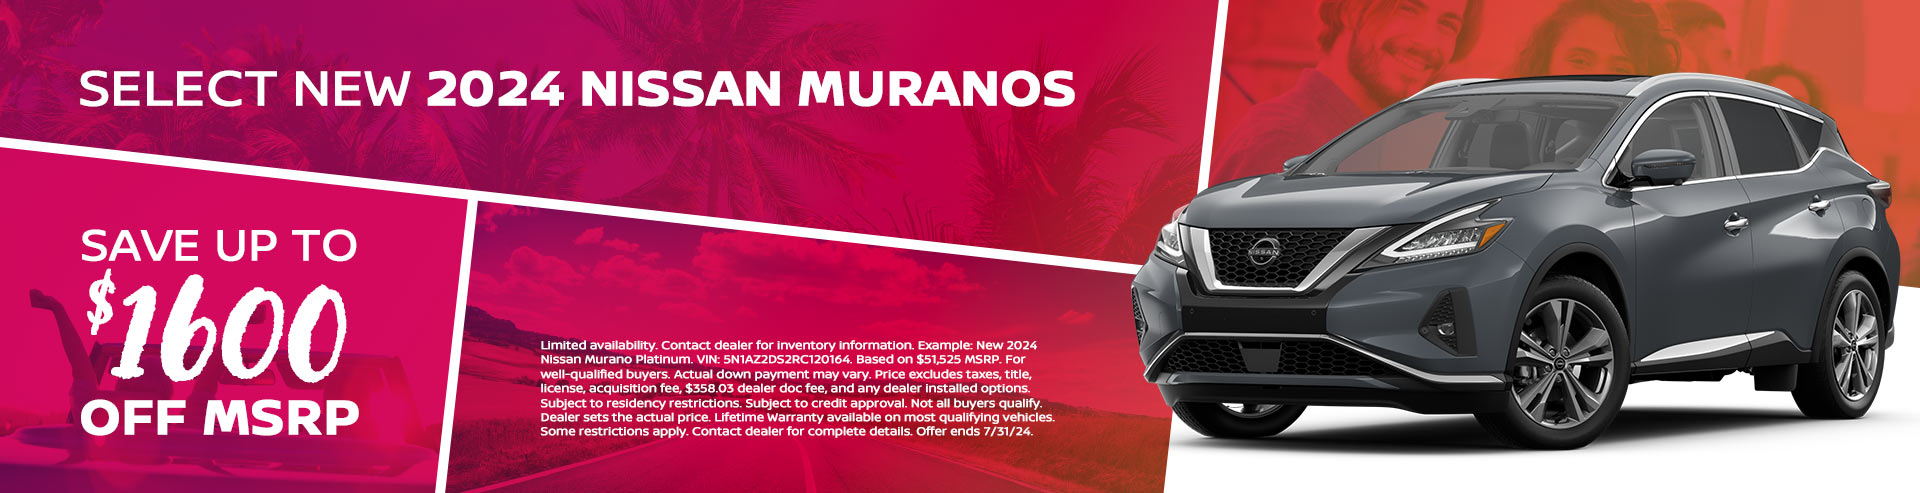 Save up to $1,600 off MSRP on select New 2024 Nissan Muranos